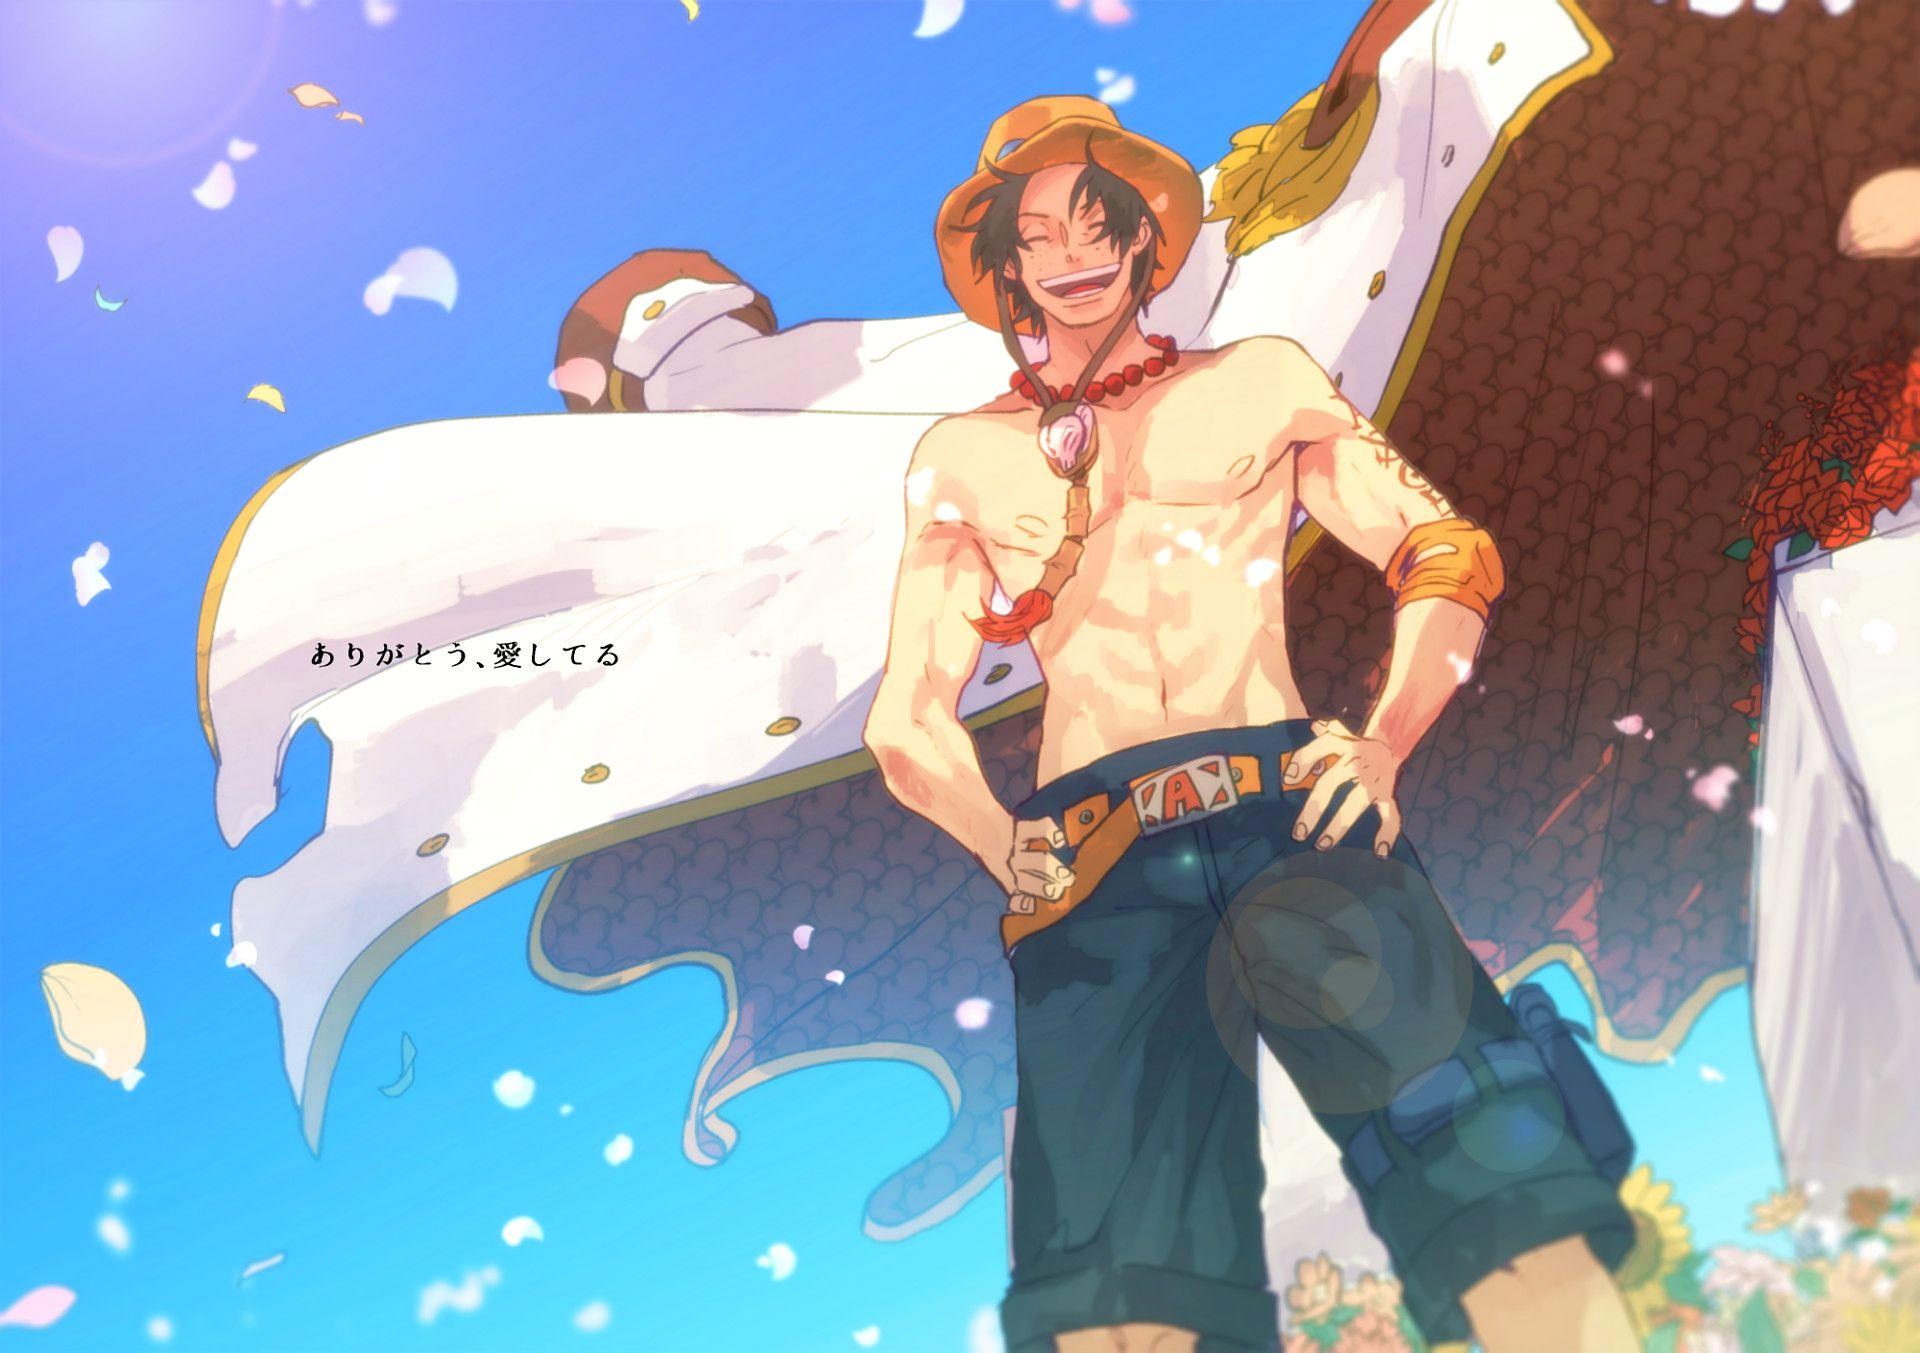 1920 x 1353 · jpeg - One Piece Ace Wallpapers - Top Free One Piece Ace Backgrounds ...